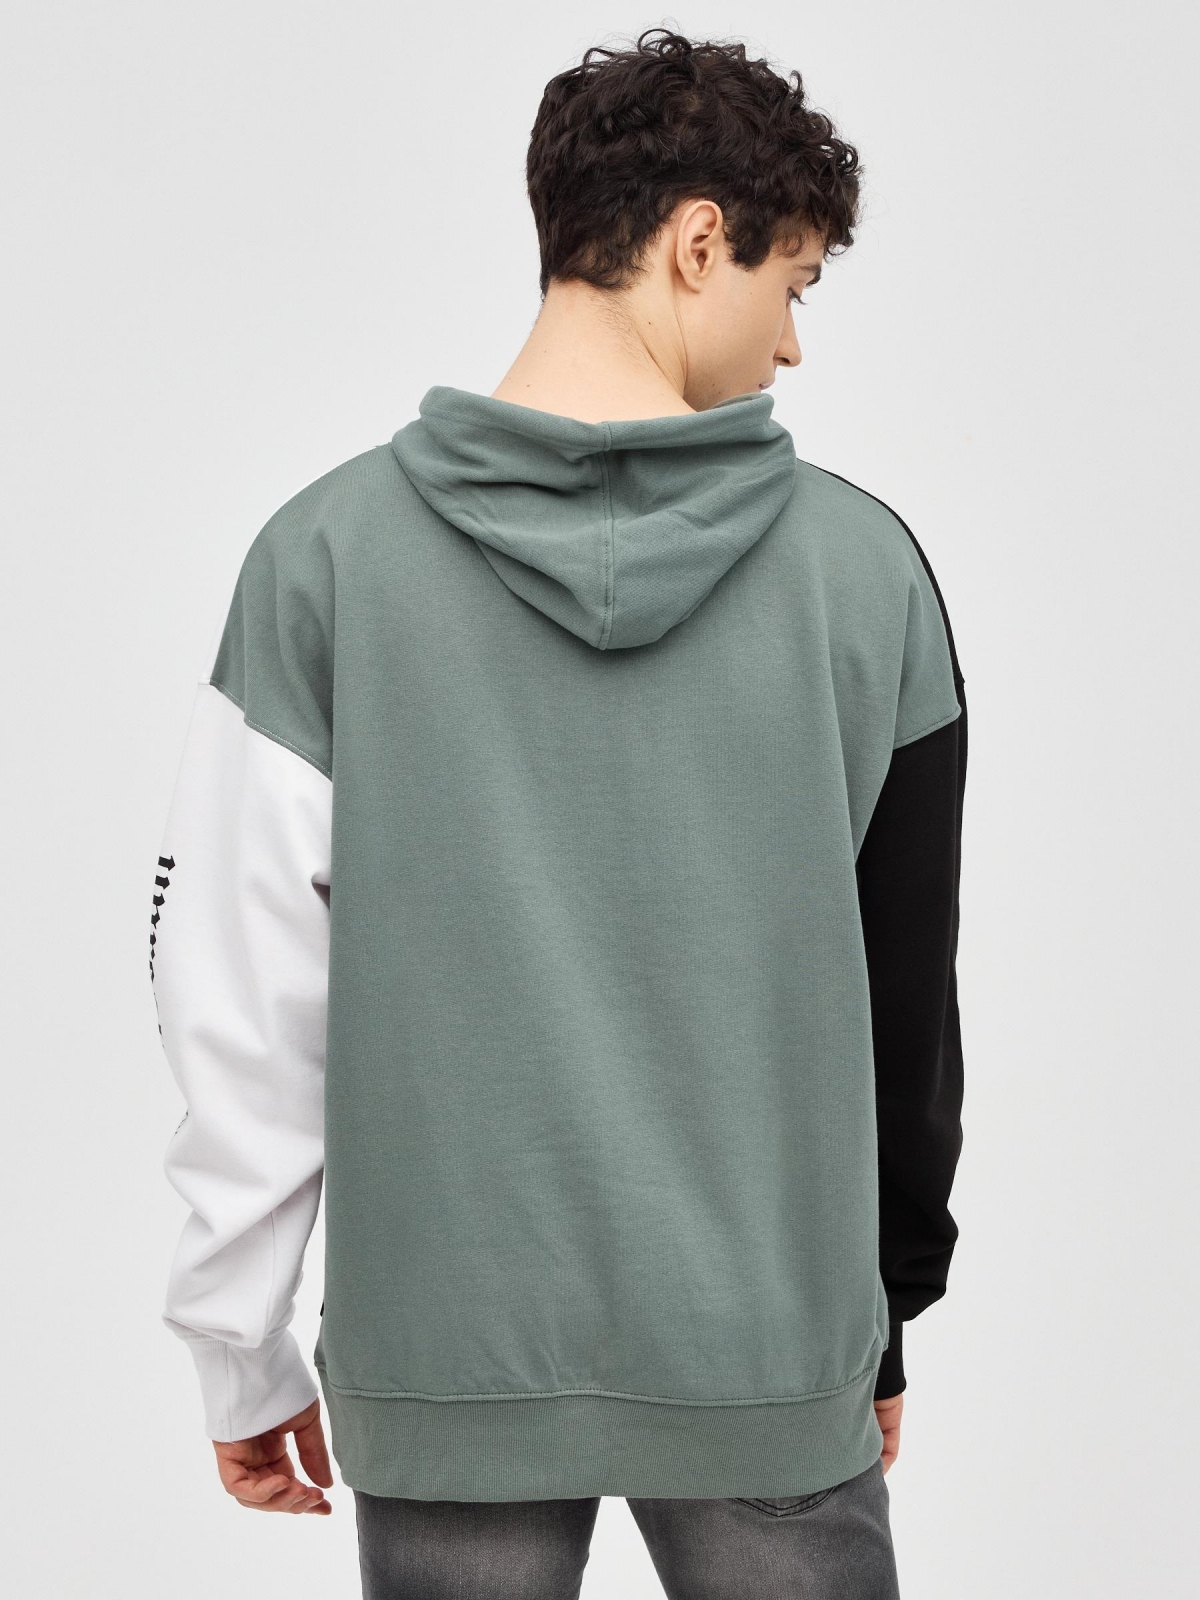 Tricolor sweatshirt with text greyish green middle back view